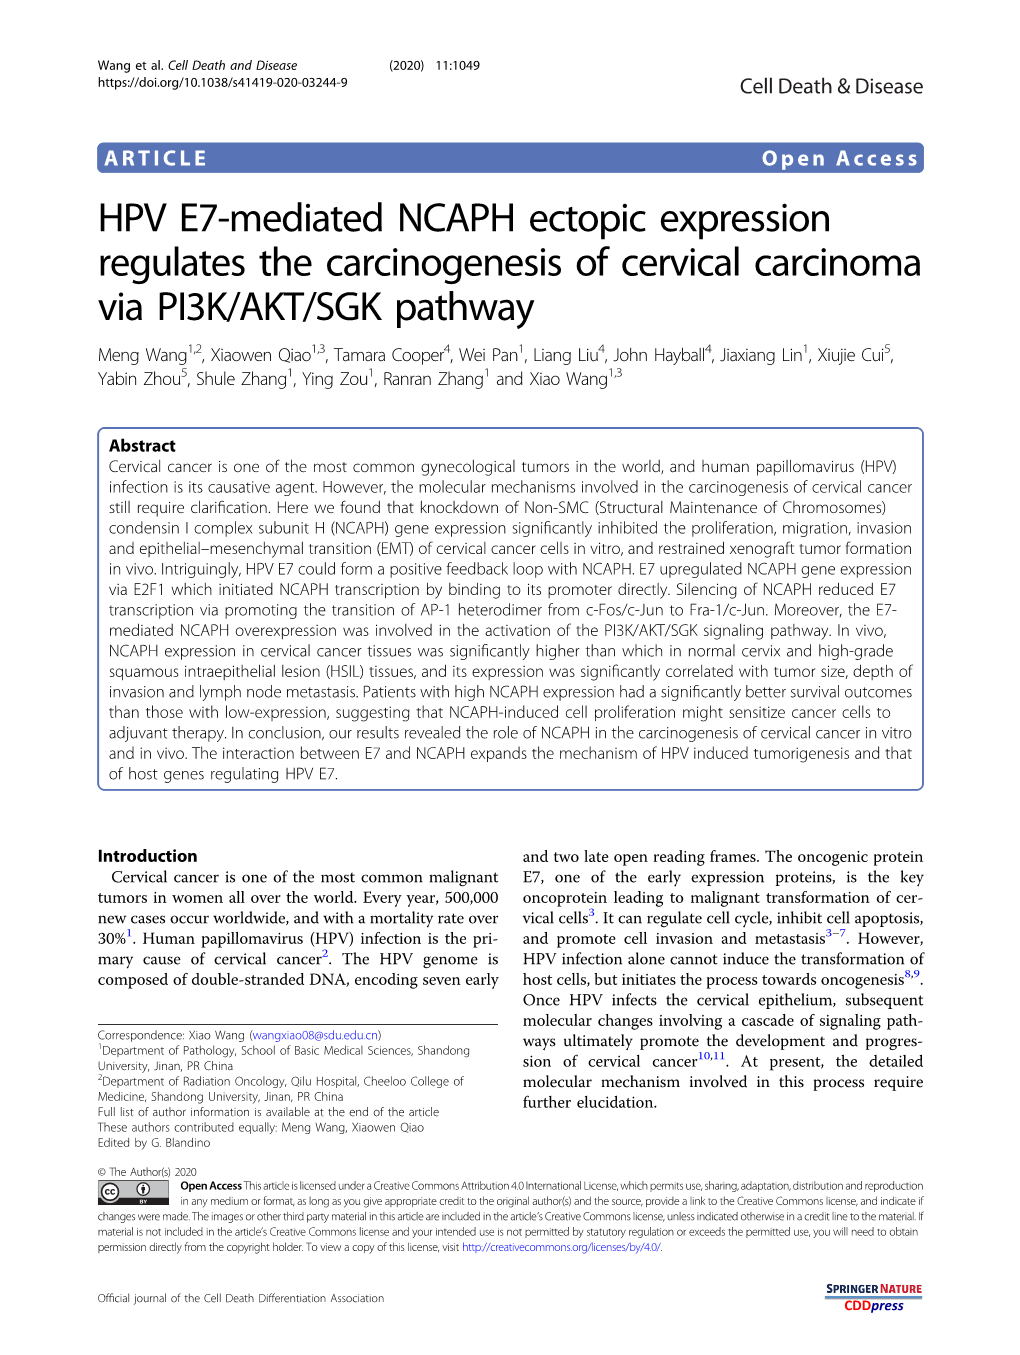 HPV E7-Mediated NCAPH Ectopic Expression Regulates The